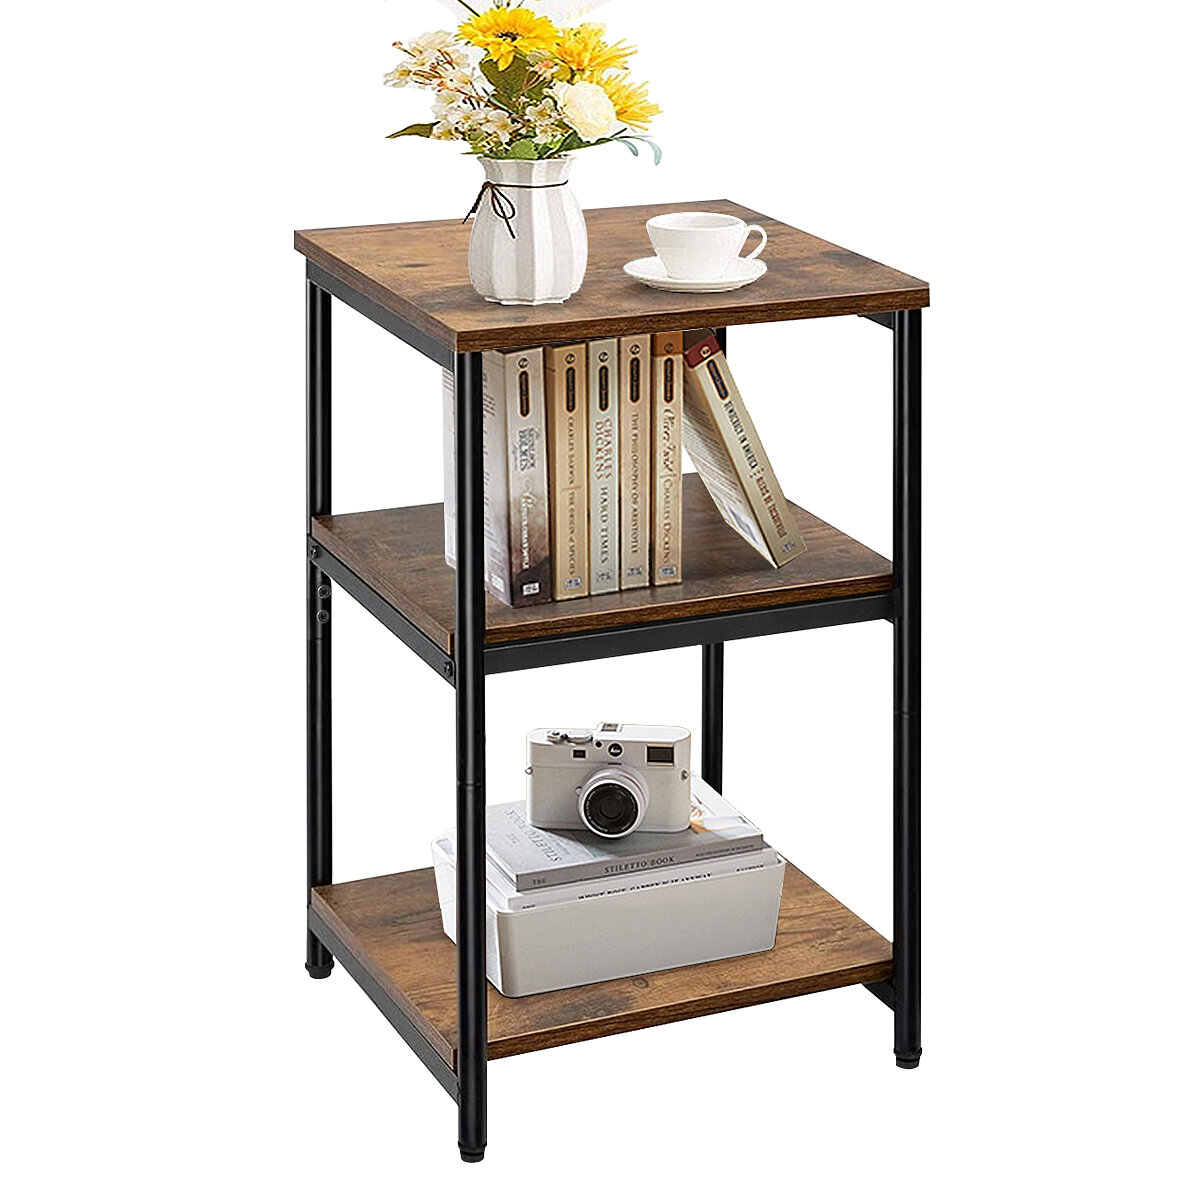 Image of Lusimo Wooden Nightstands 3-Tier Side Table W/ Adjustable Shelf Industrial End Table